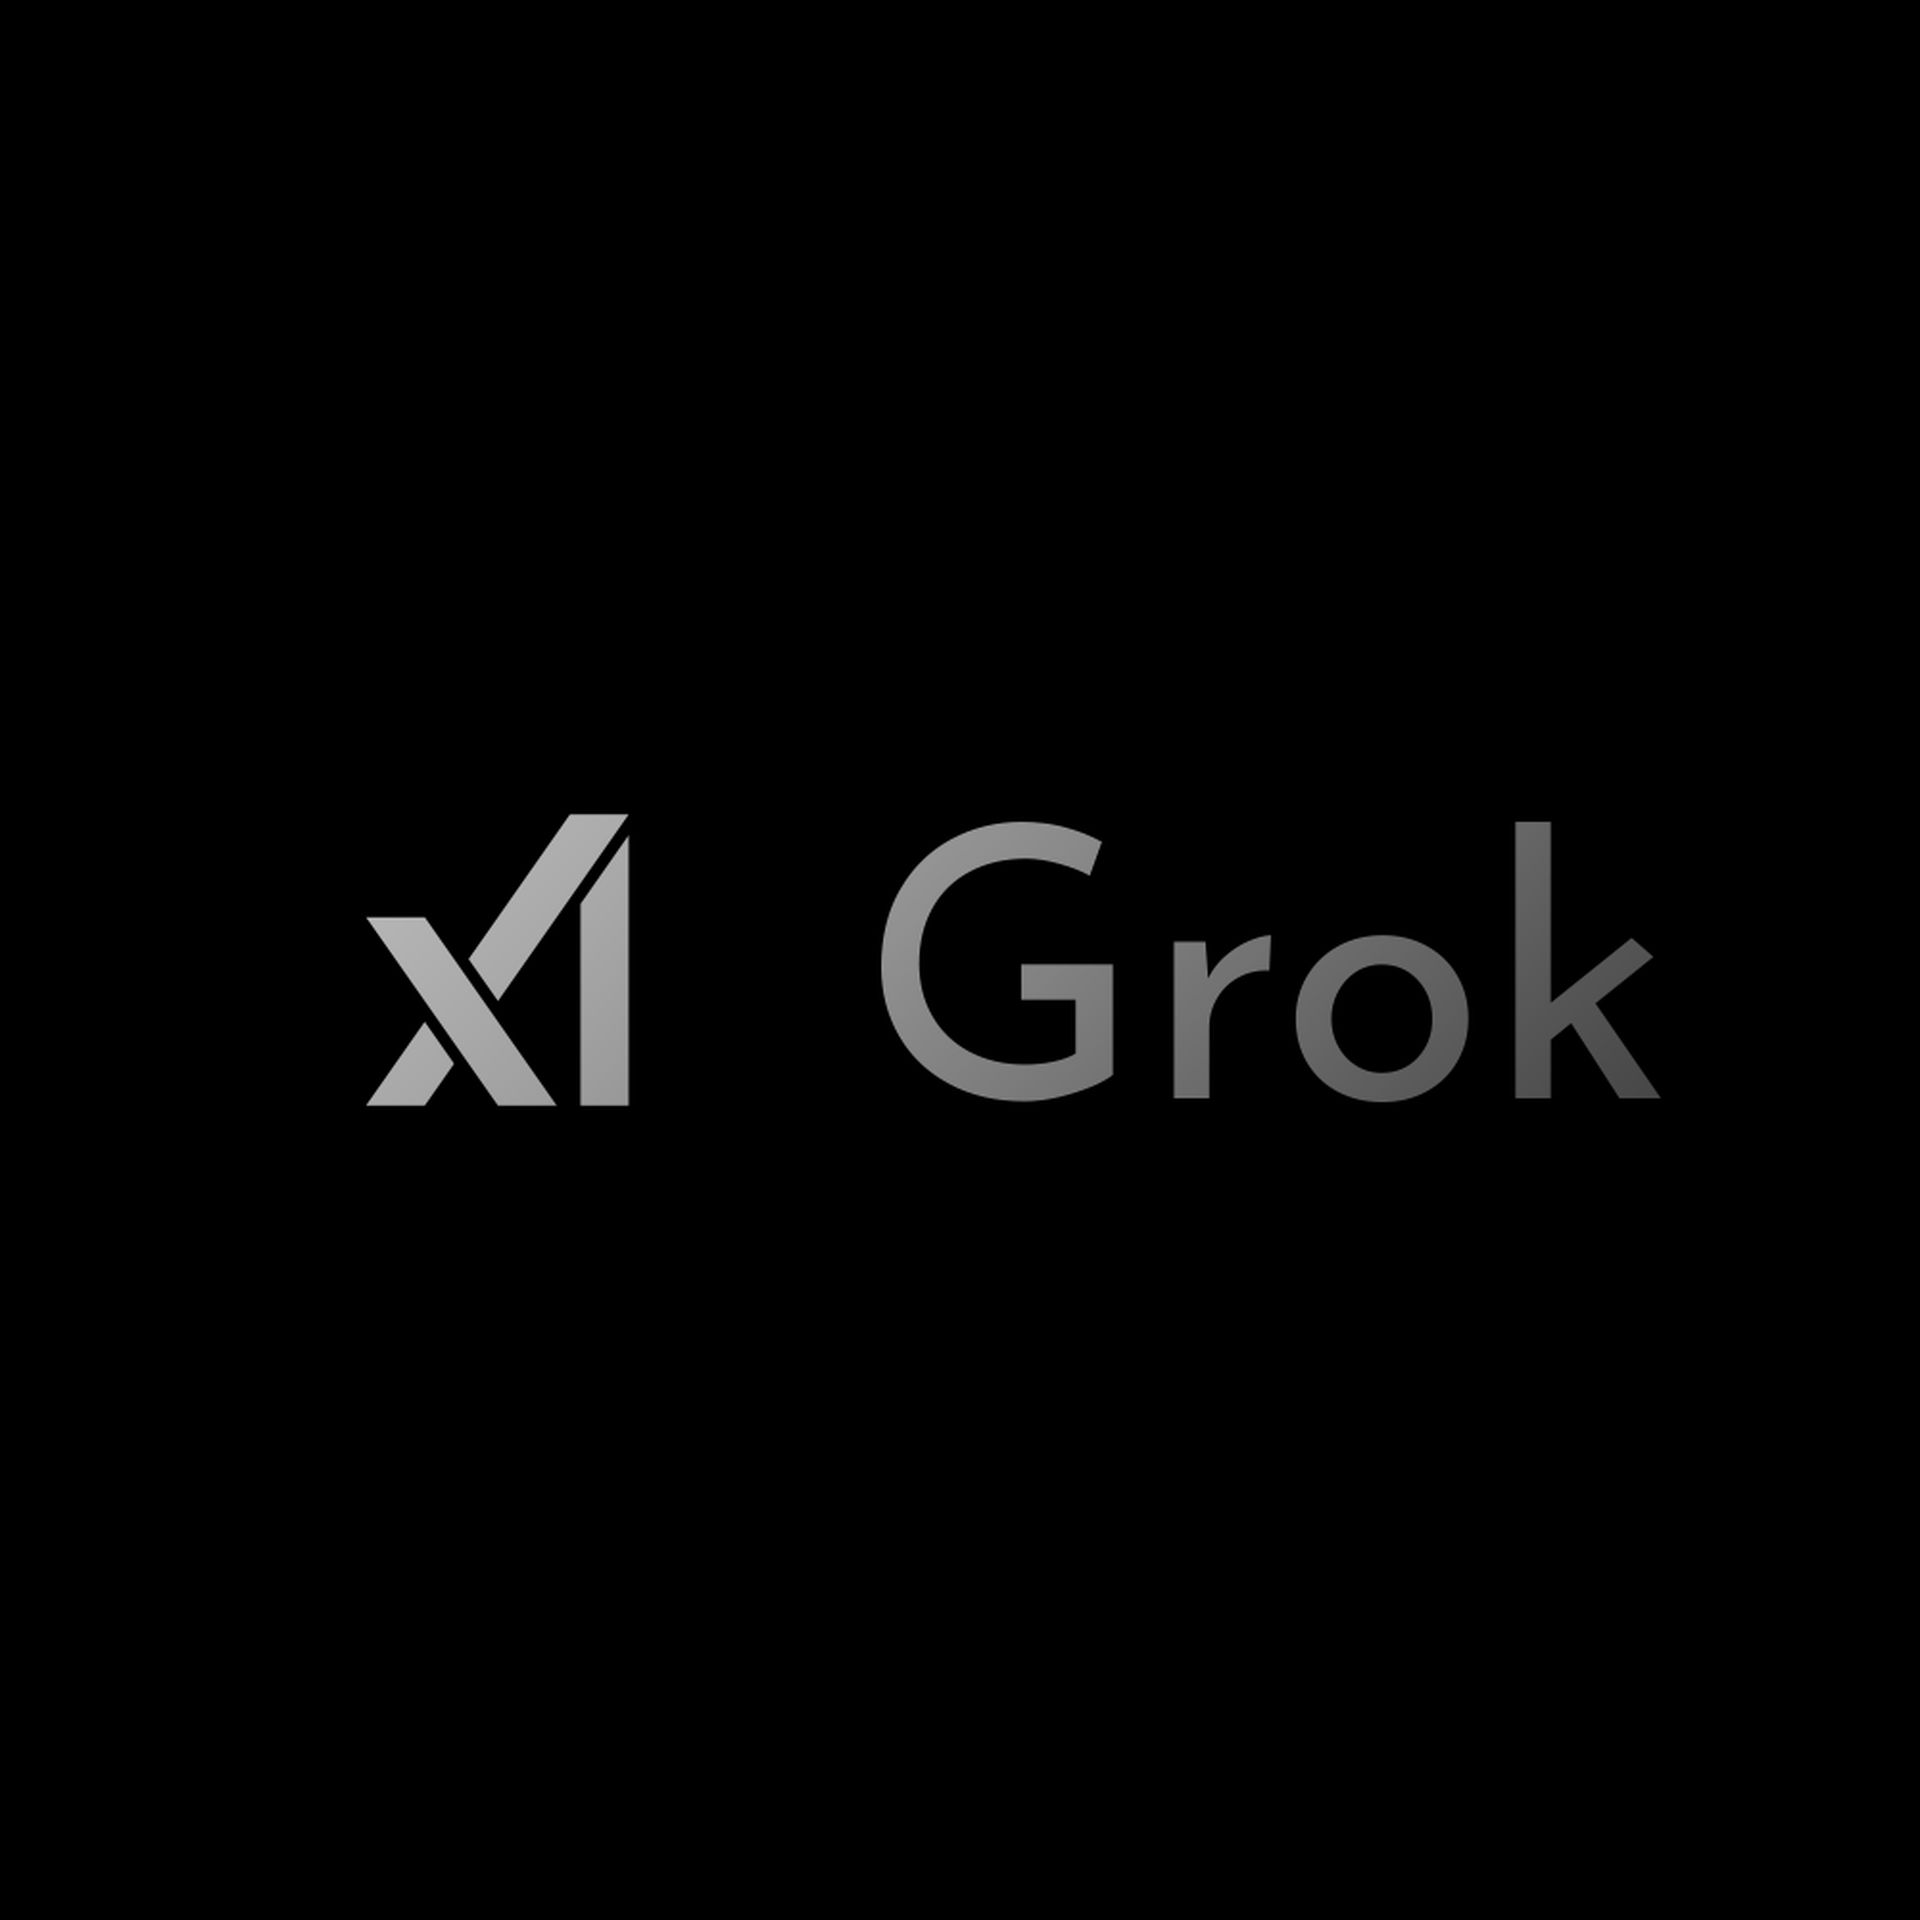 A giant move in AI: Grok 1.0 made open-source